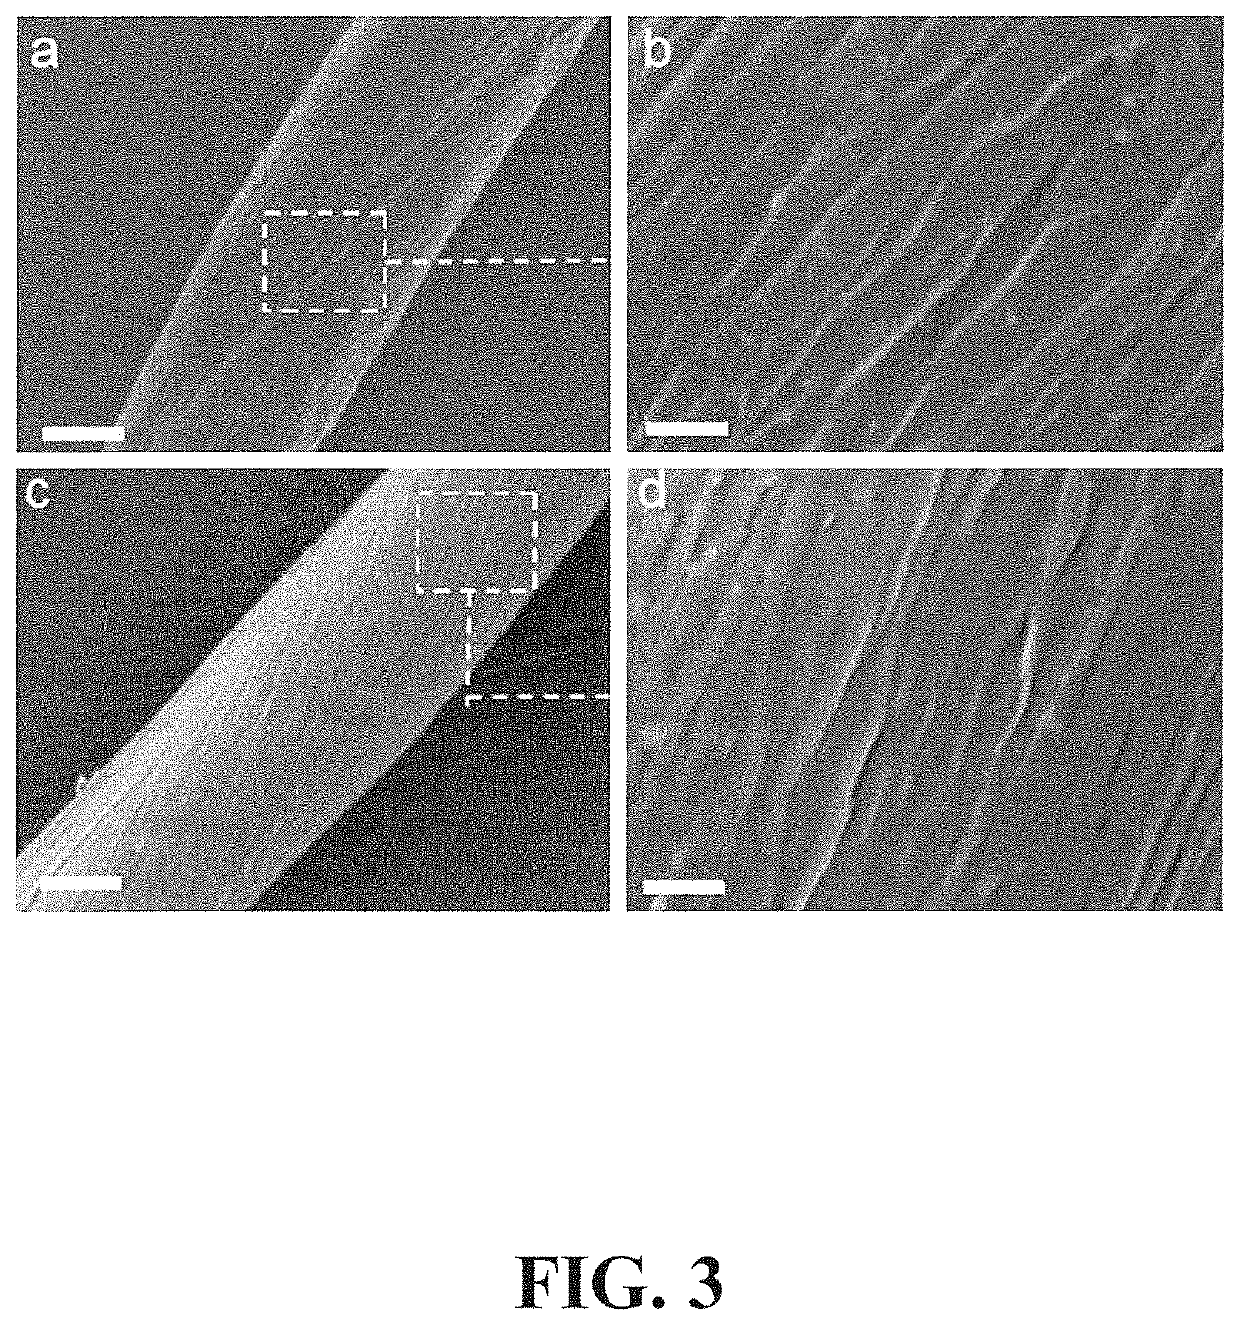 Metal nanoparticle enhanced semiconductor film for functionalized textiles